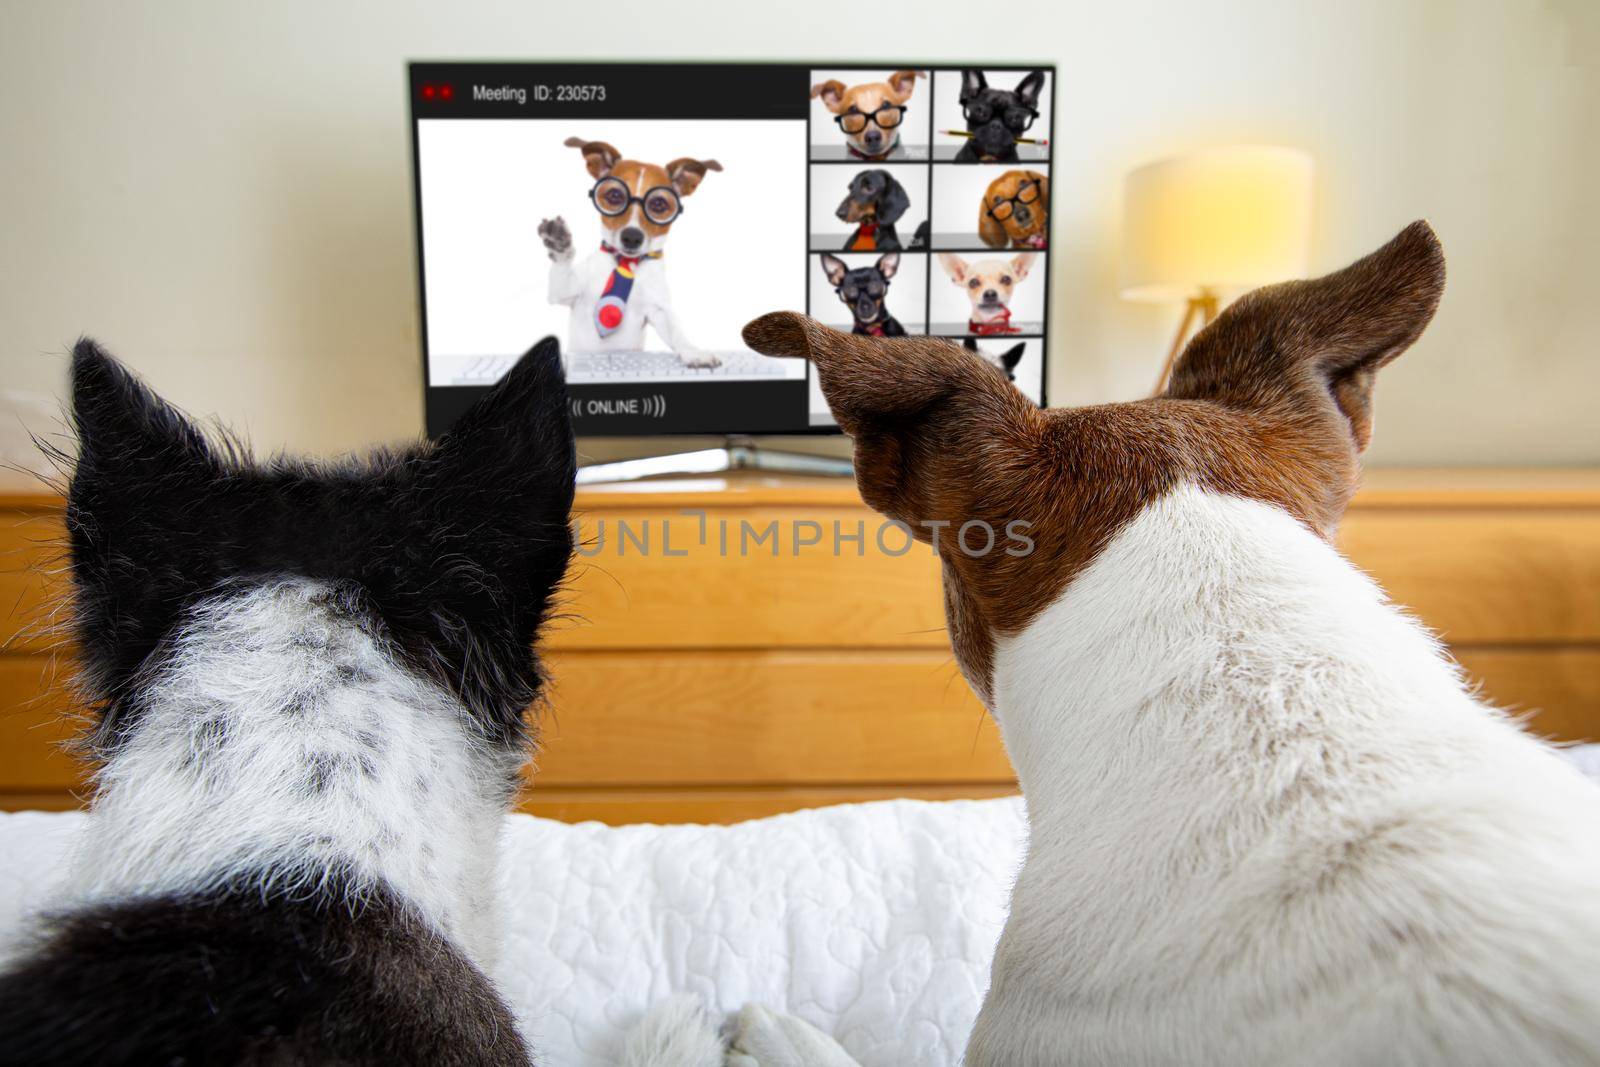 dog having an online meeting video conference by Brosch